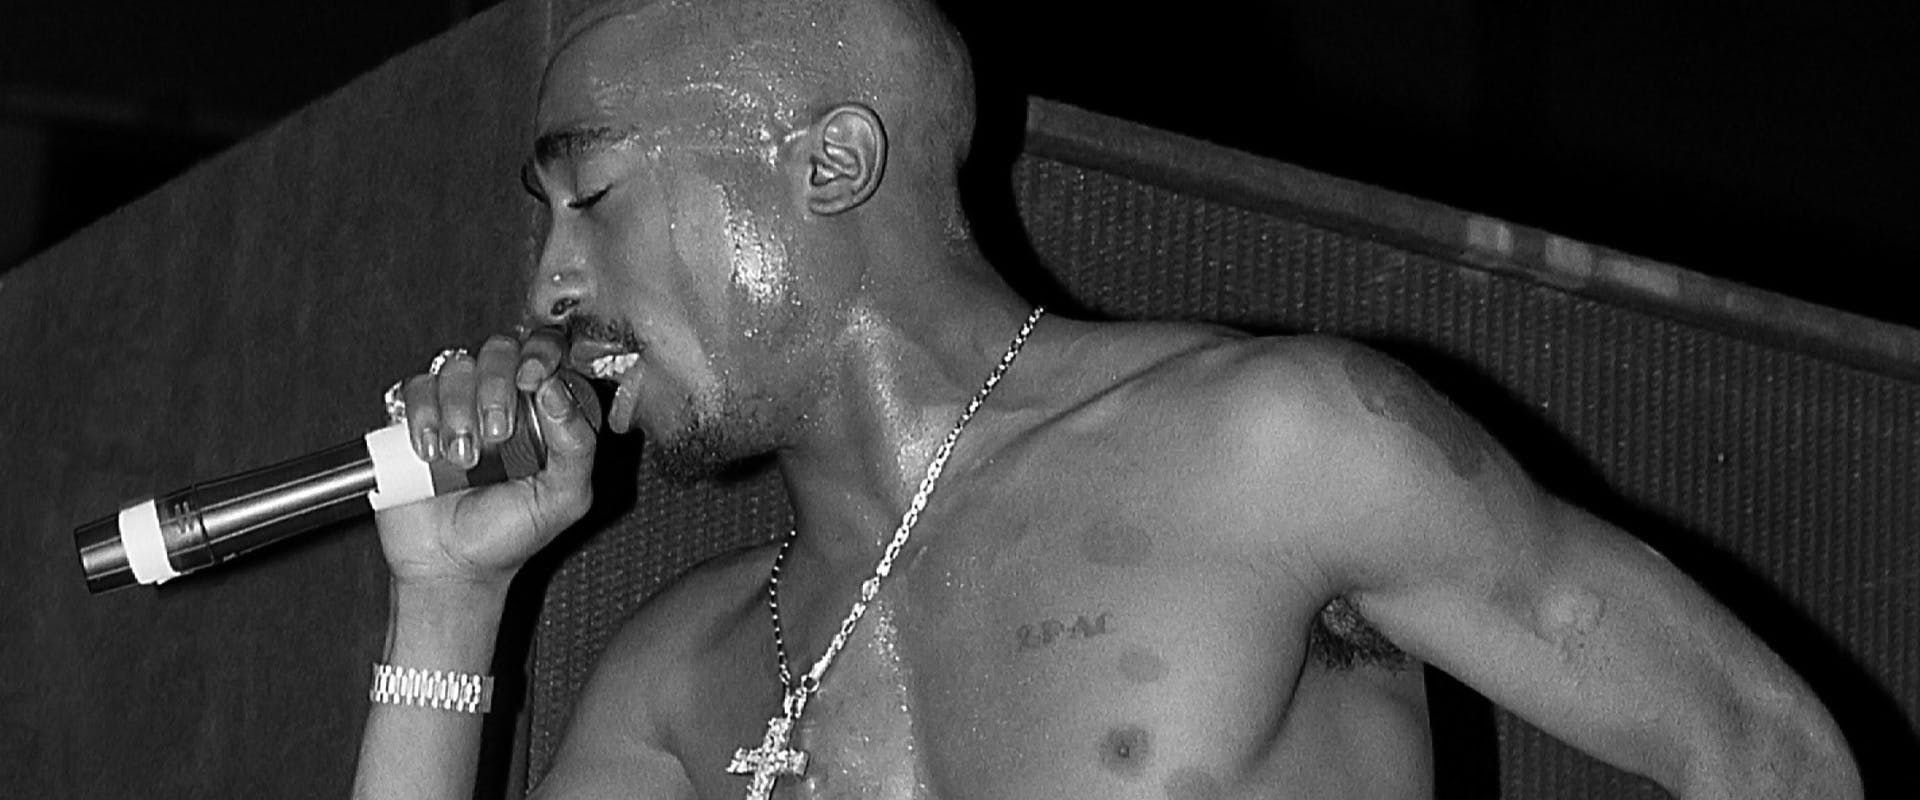 Tupac Shakur Live In Concert
MILWAUKEE - SEPTEMBER 1994: Rapper Tupac Shakur performs at the Mecca Arena in Milwaukee, Wisconsin in September 1994. (Photo By Raymond Boyd/Getty Images)